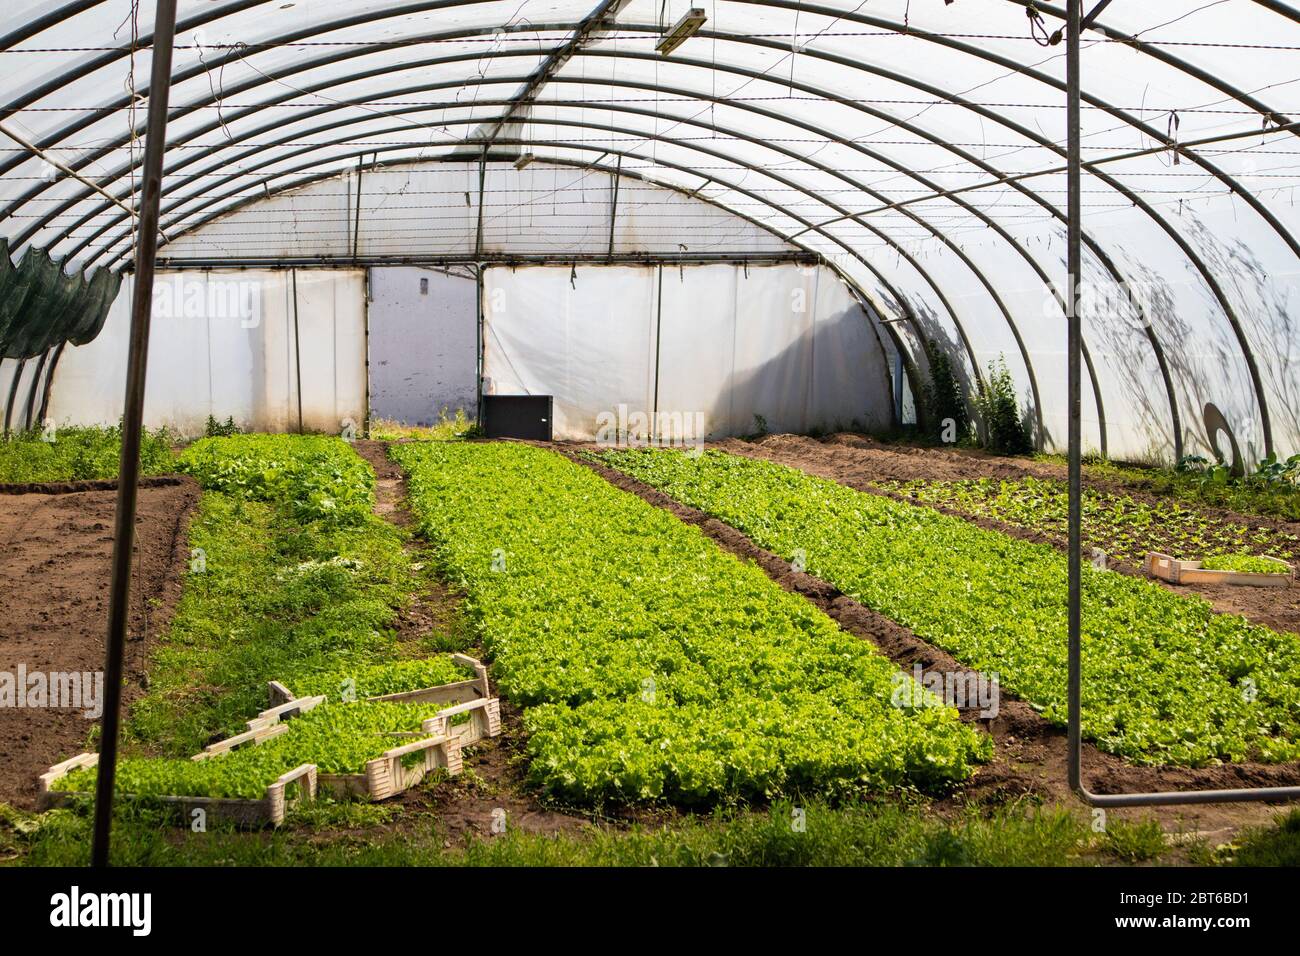 Greenhouse full of fresh lettuce growing, almost ready to be harvested Stock Photo